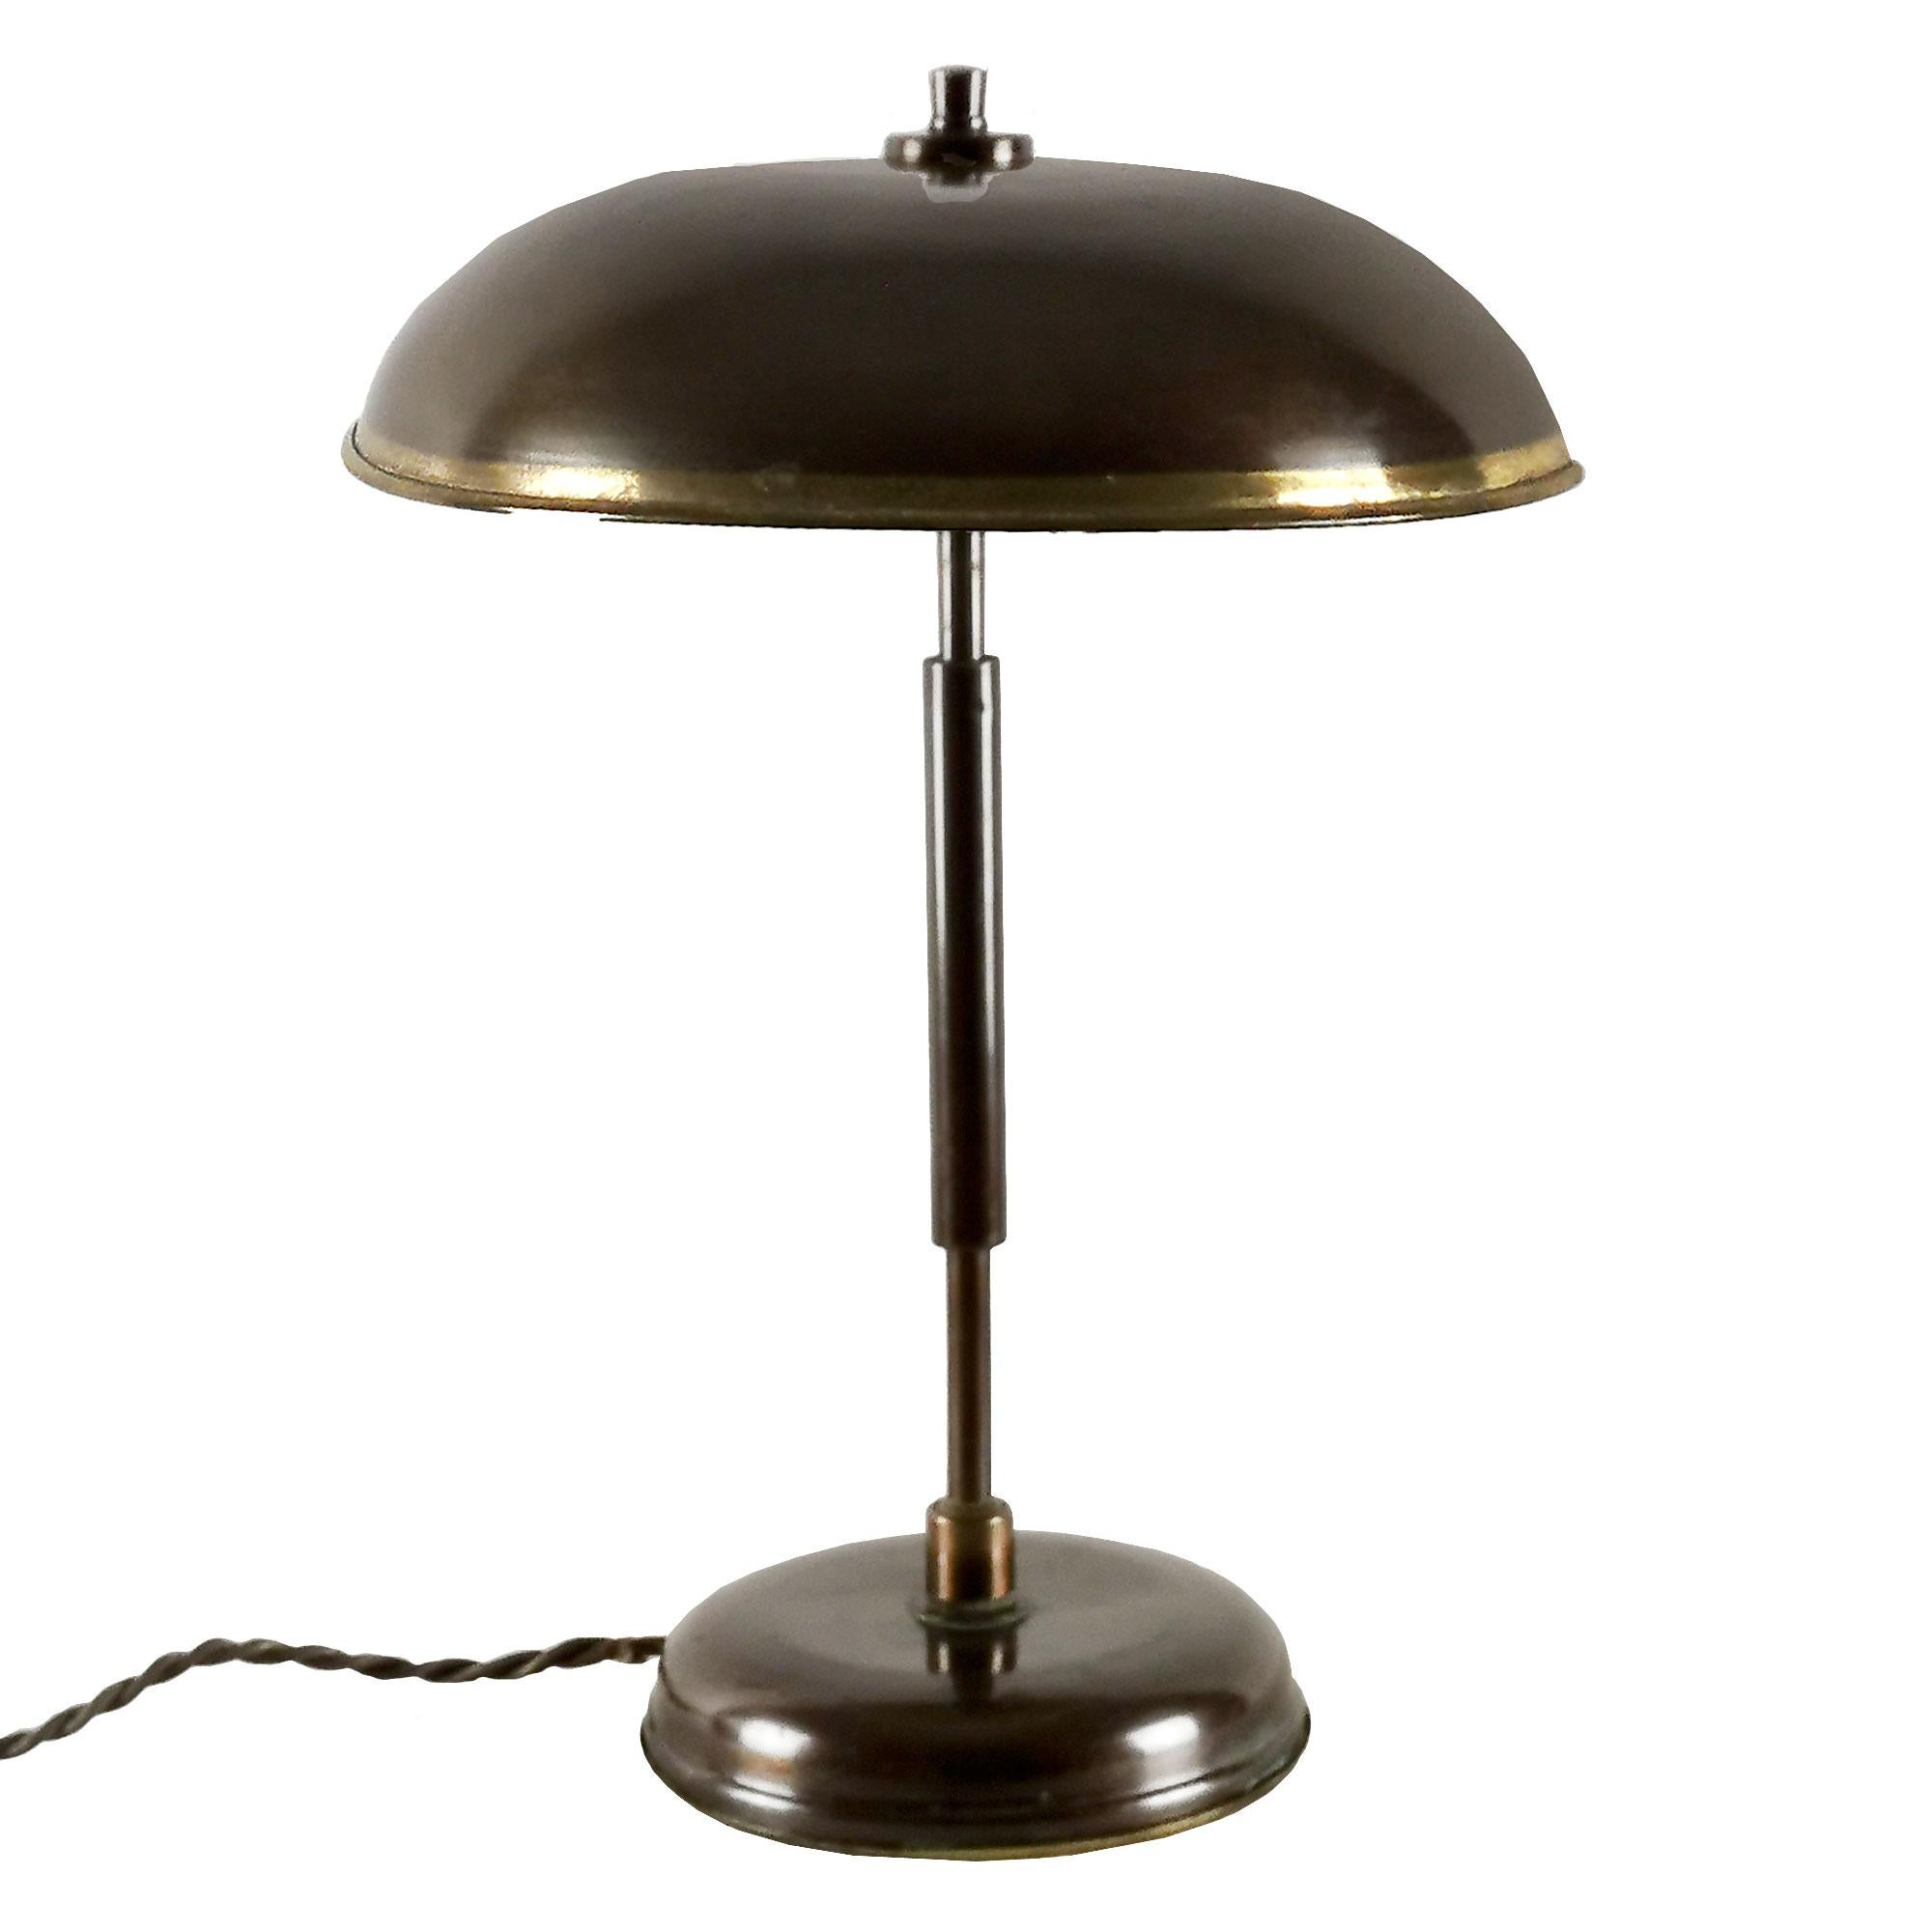 Desk lamp in patinated brass, adjustable inclination by two ball joints (one in base, one in reflector). Golden strip decoration on the reflector, two bulbs.

Italy, circa 1940